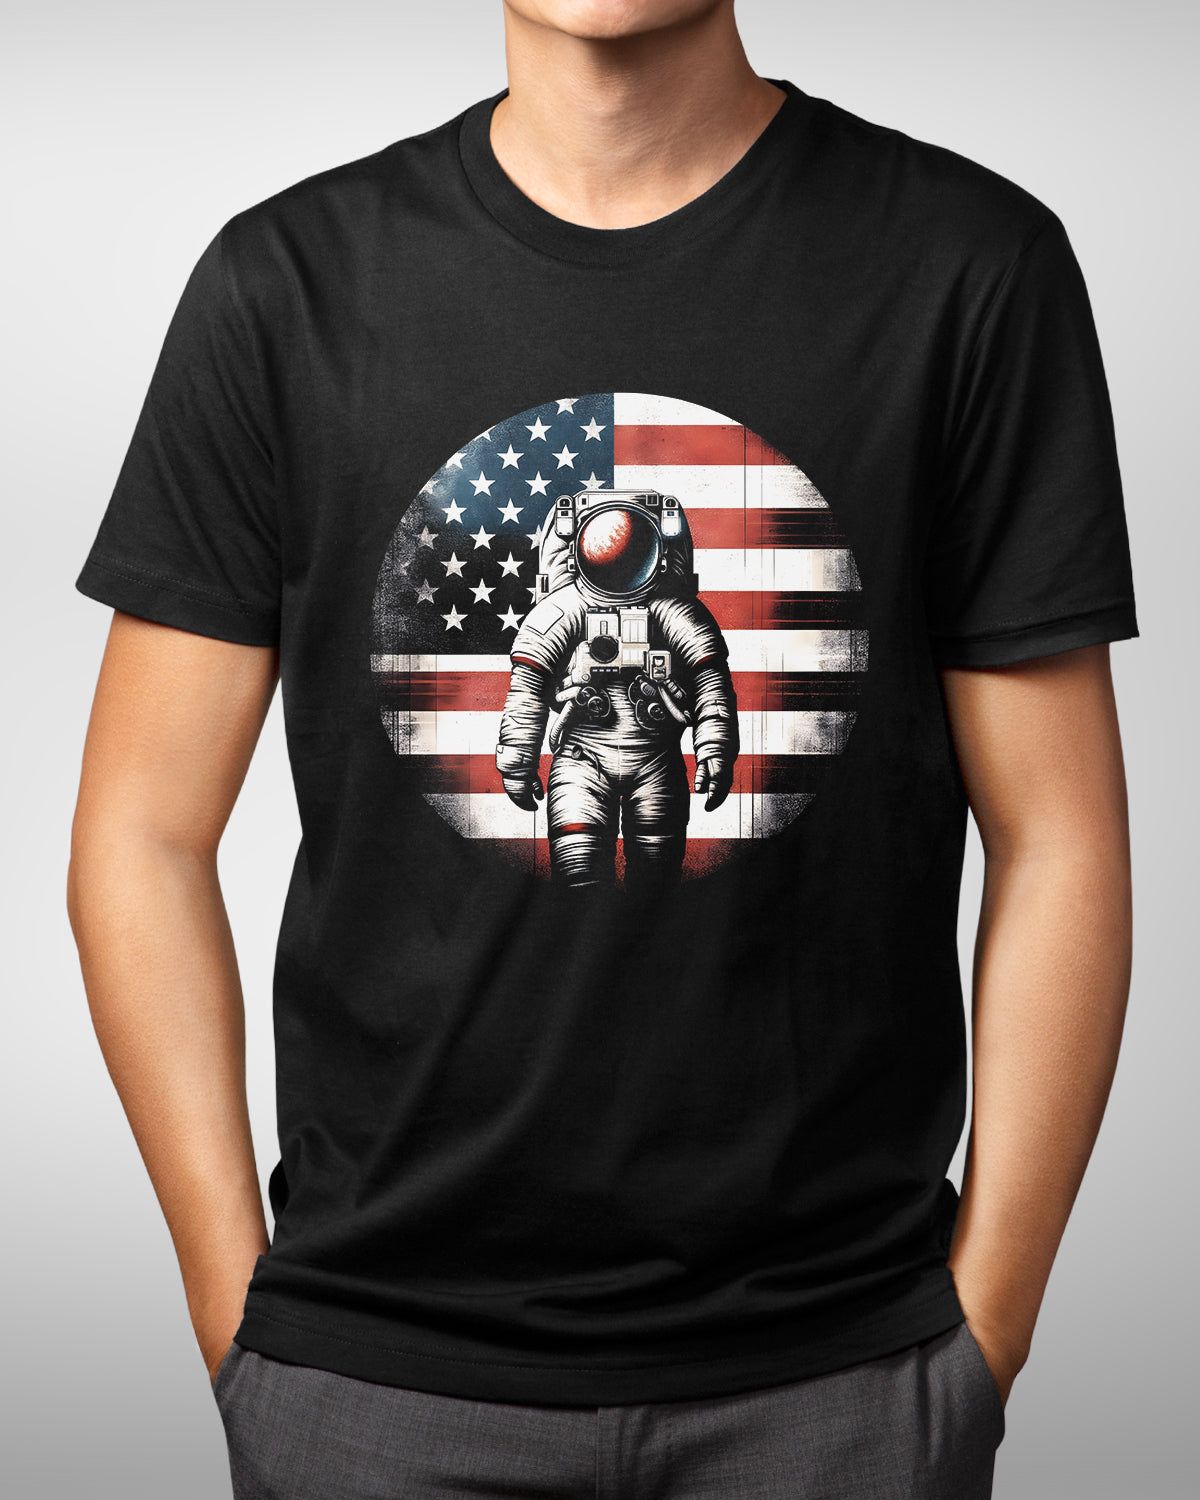 Vintage Patriotic Astronaut Shirt, American Flag Space Tee, 4th of July Outer Space, USA Spaceman Tee